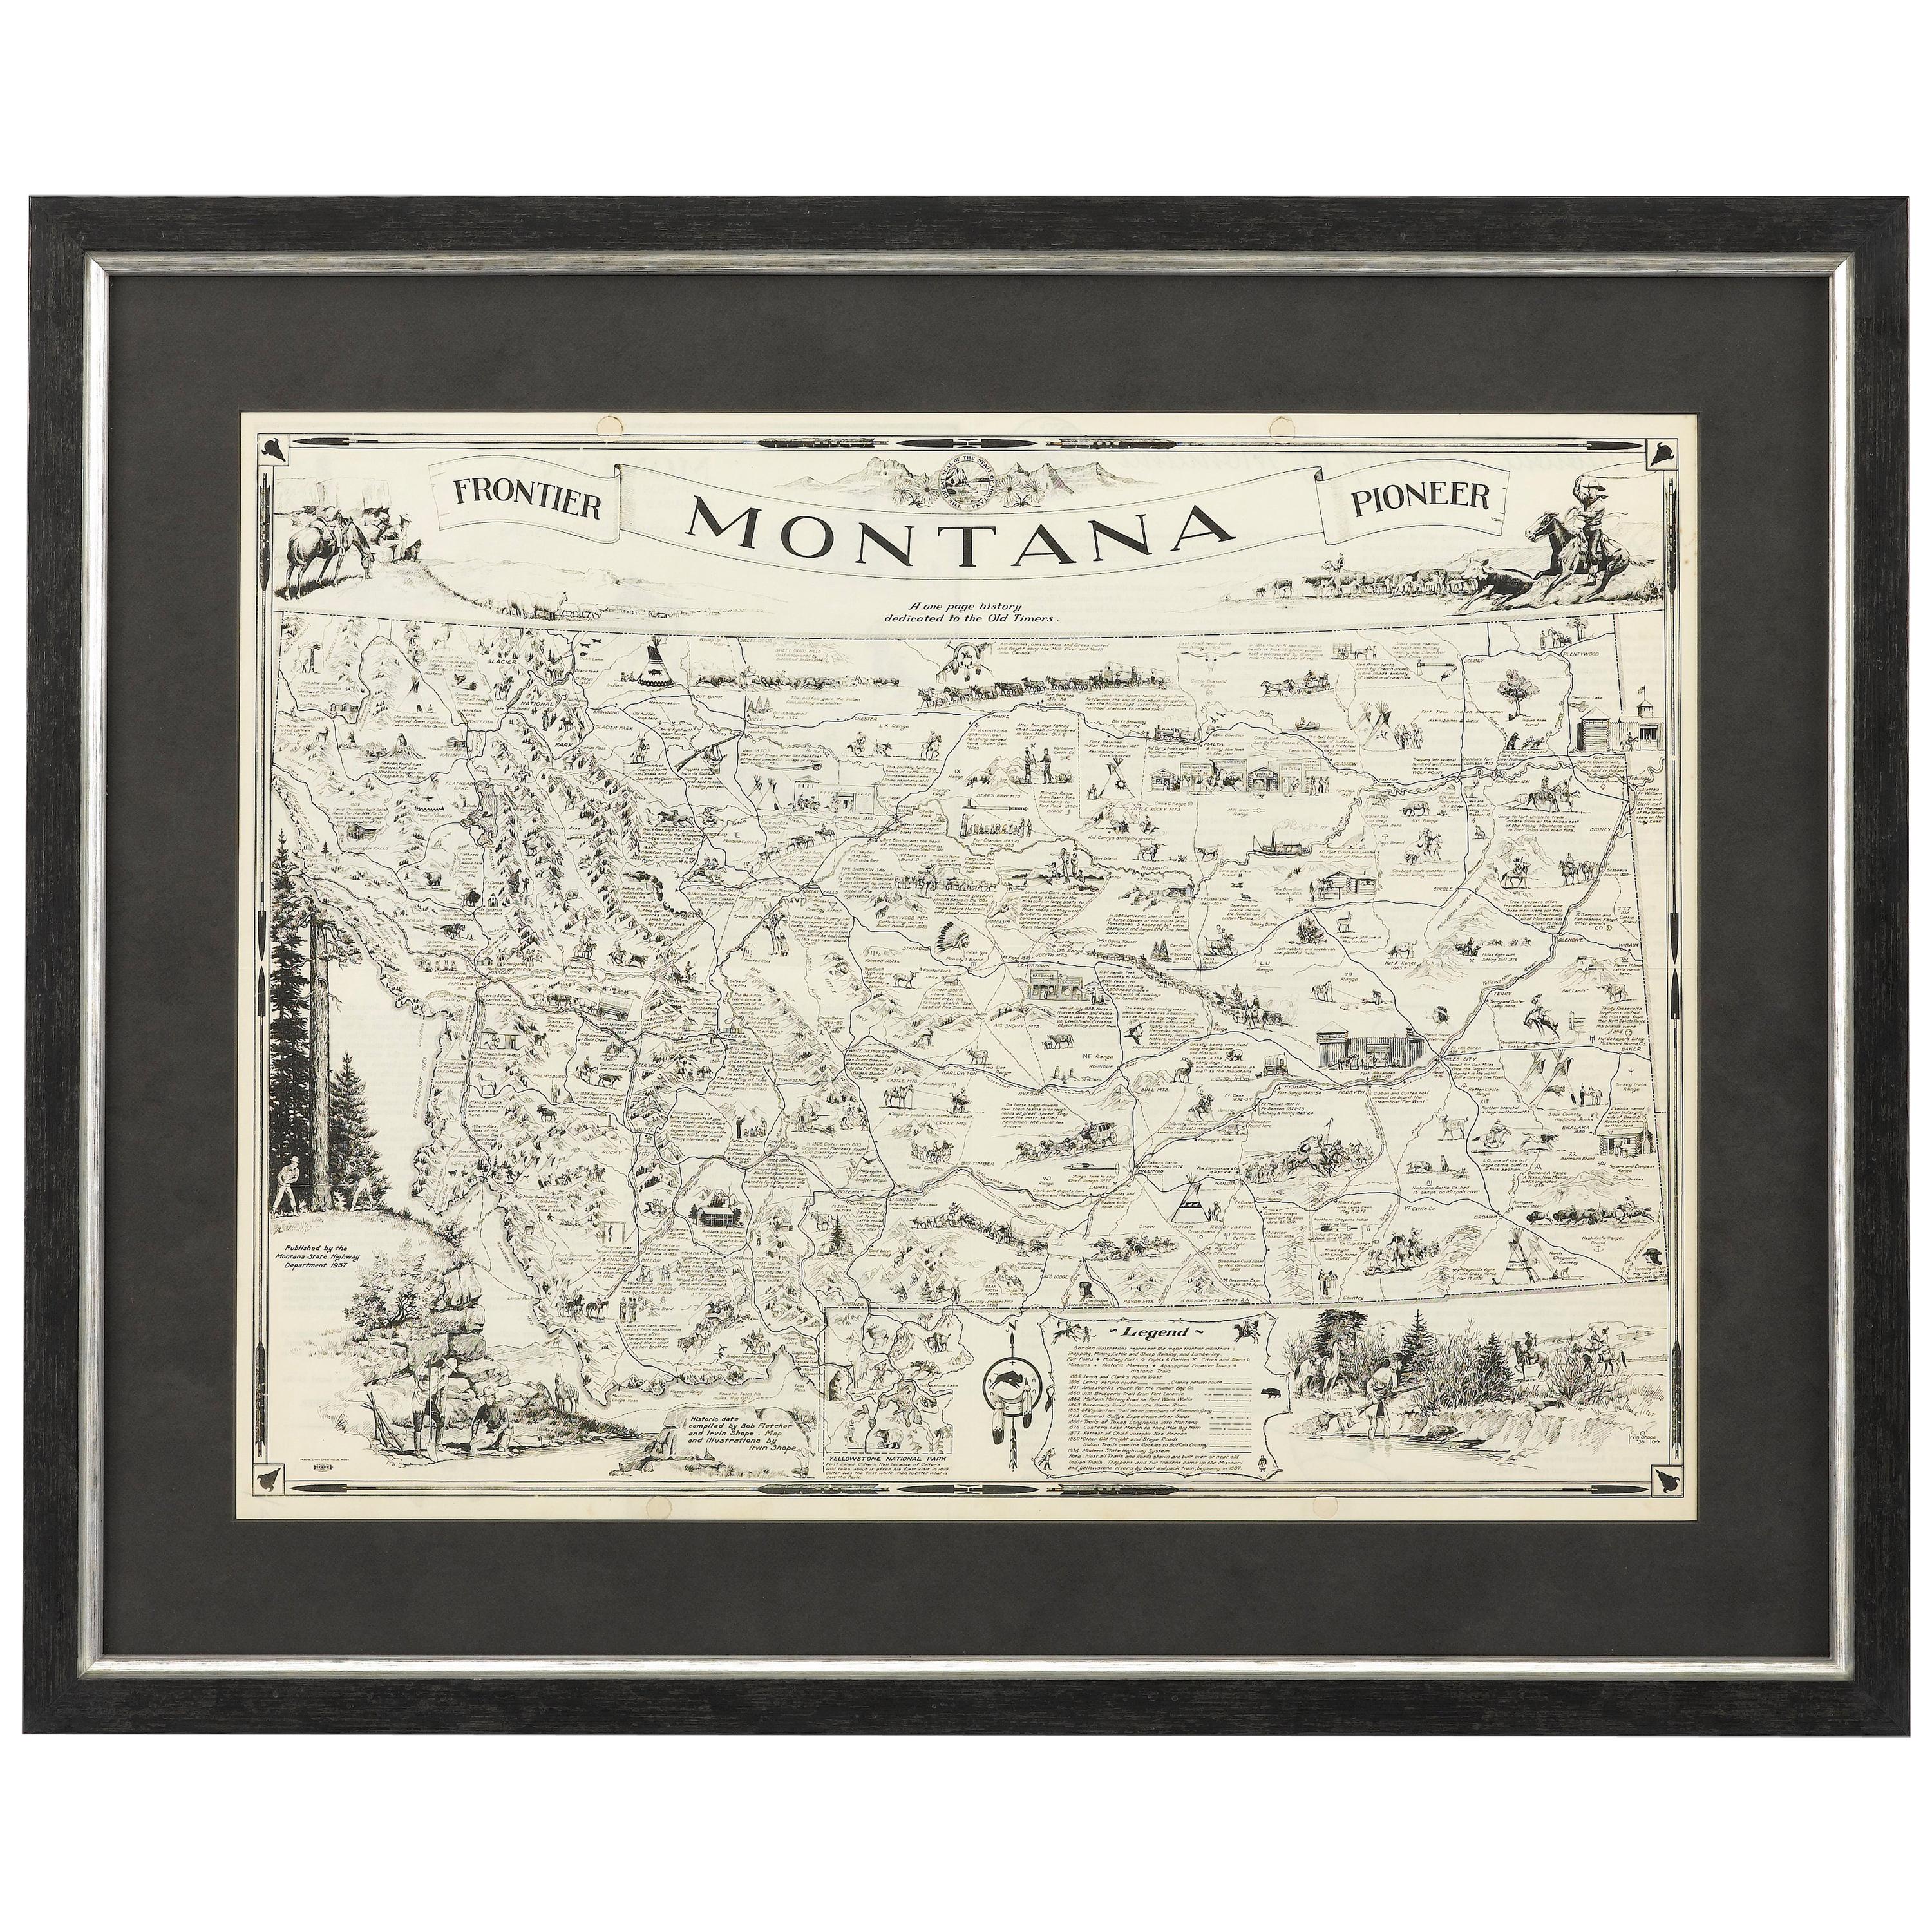 1937 Pictorial Map of Montana by Irvin Shope